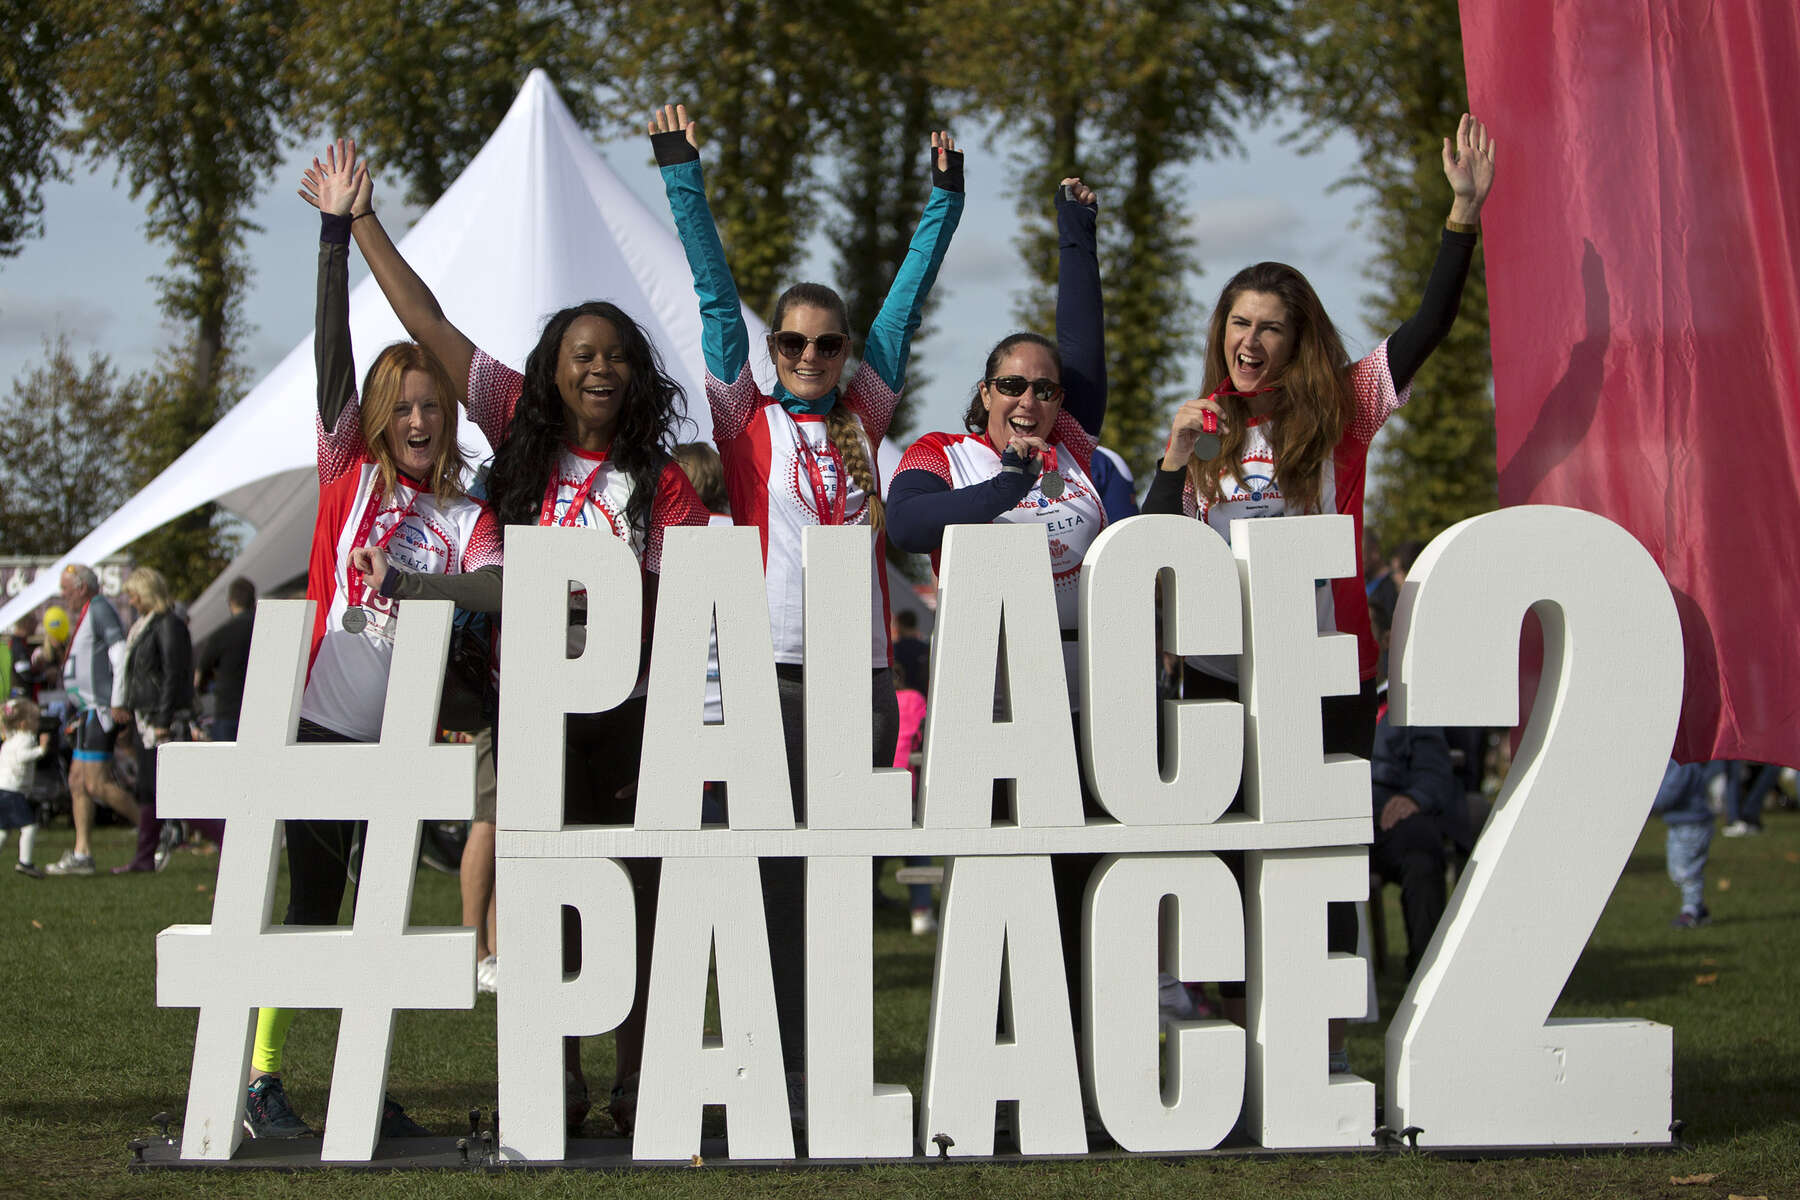 LONDON, UNITED KINGDOM – 7 October, 2018:  Delta employees take part in the Prince’s Trust Palace to Palace charity bike ride, cycling from Buckingham Palace to Windsor Palace, in the UK, on 7 October, 2018. Pictured from left are: Kelly Donaghey, Chizzie Mbubaegbu, Sonia Whitten, Sian Spencer, and Sara Andell.